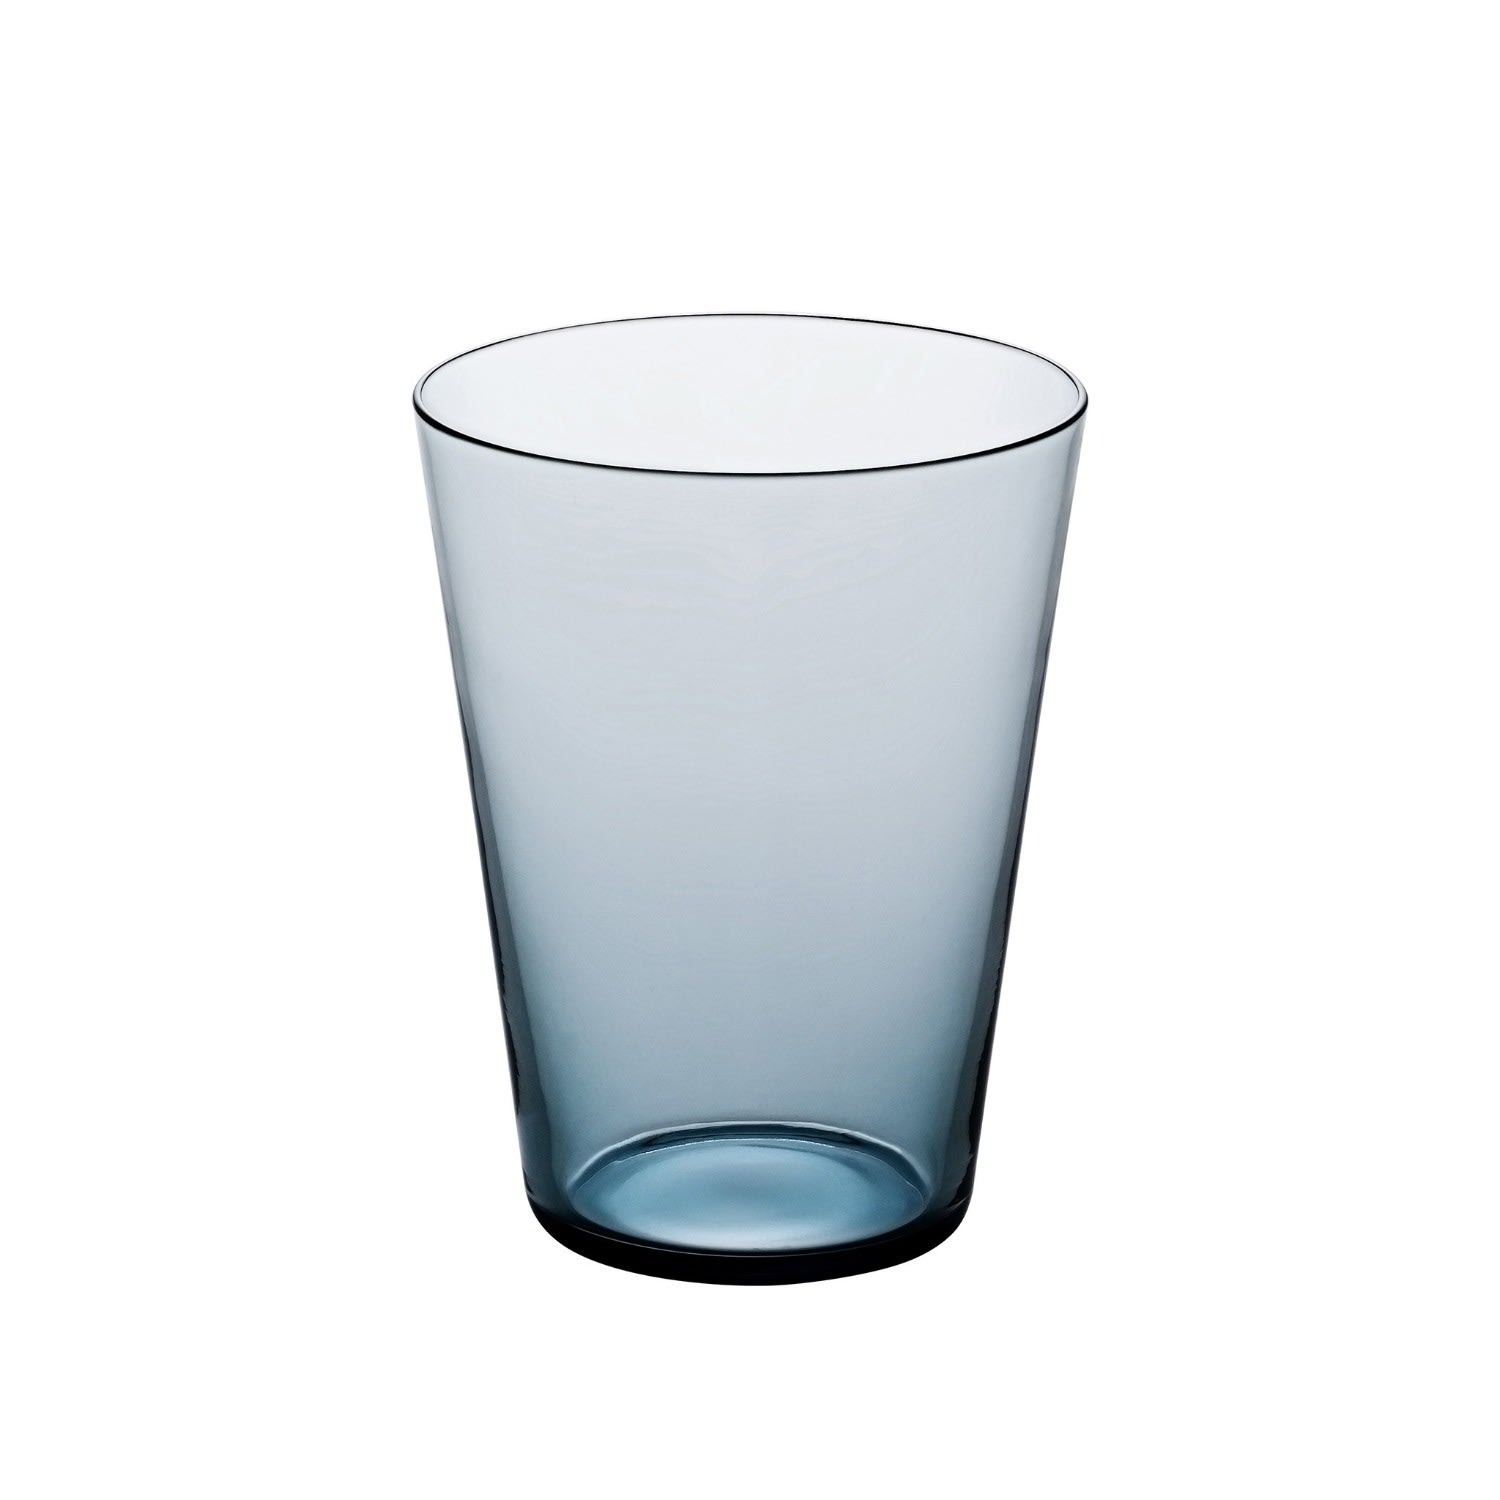 Sghr Sugahara Fifty's Handcrafted Glass Tumbler - Blue